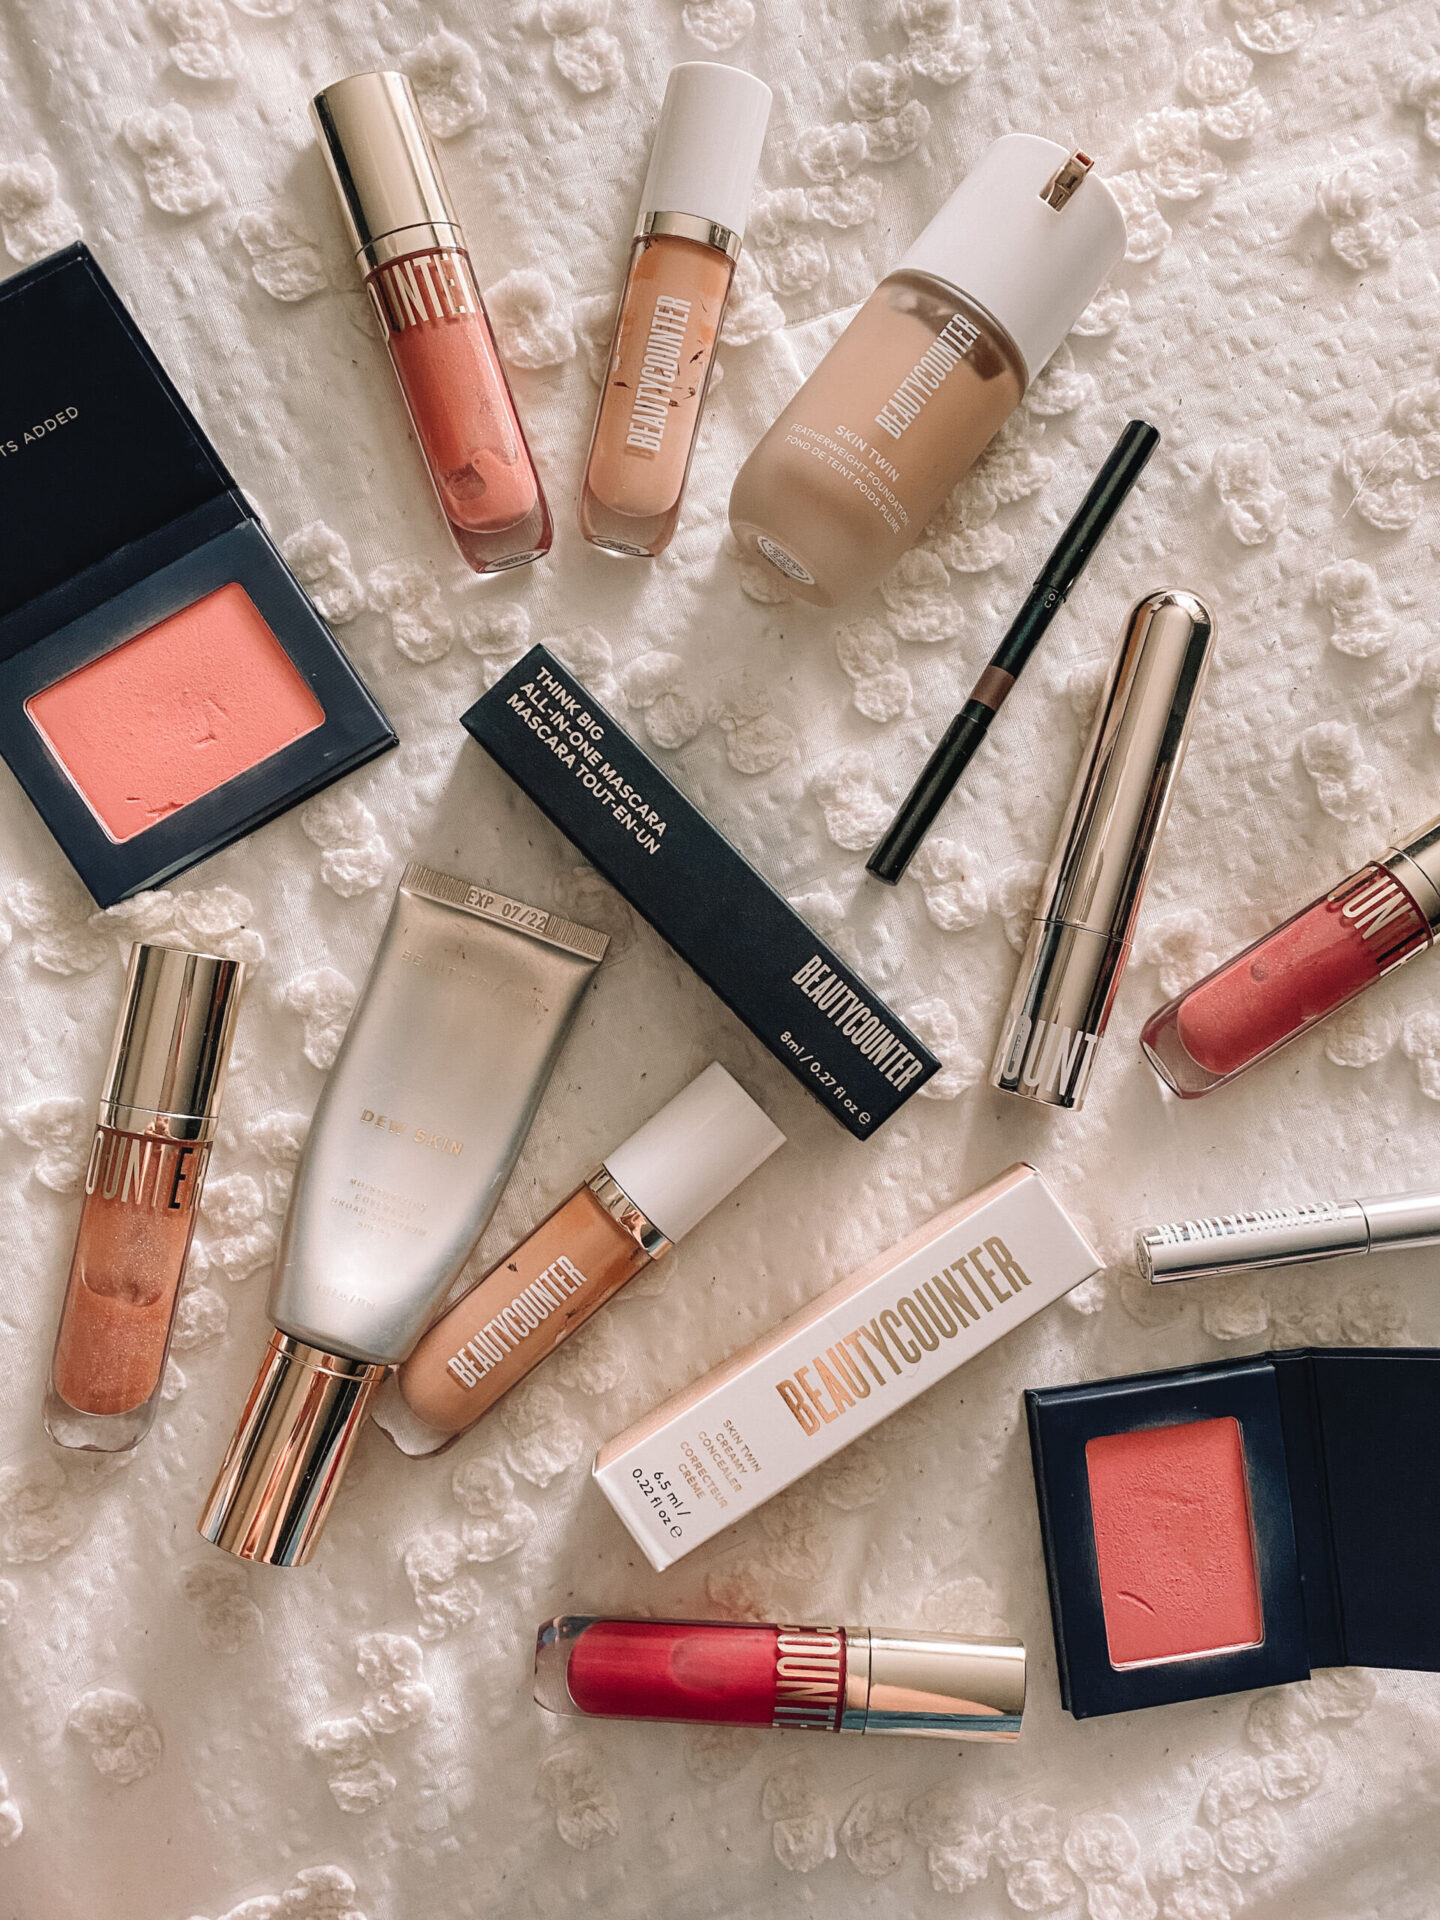 MY FAVORITE CLEAN MAKEUP JUST GOT BETTER – BEAUTYCOUNTER FLAWLESS IN FIVE REVIEW